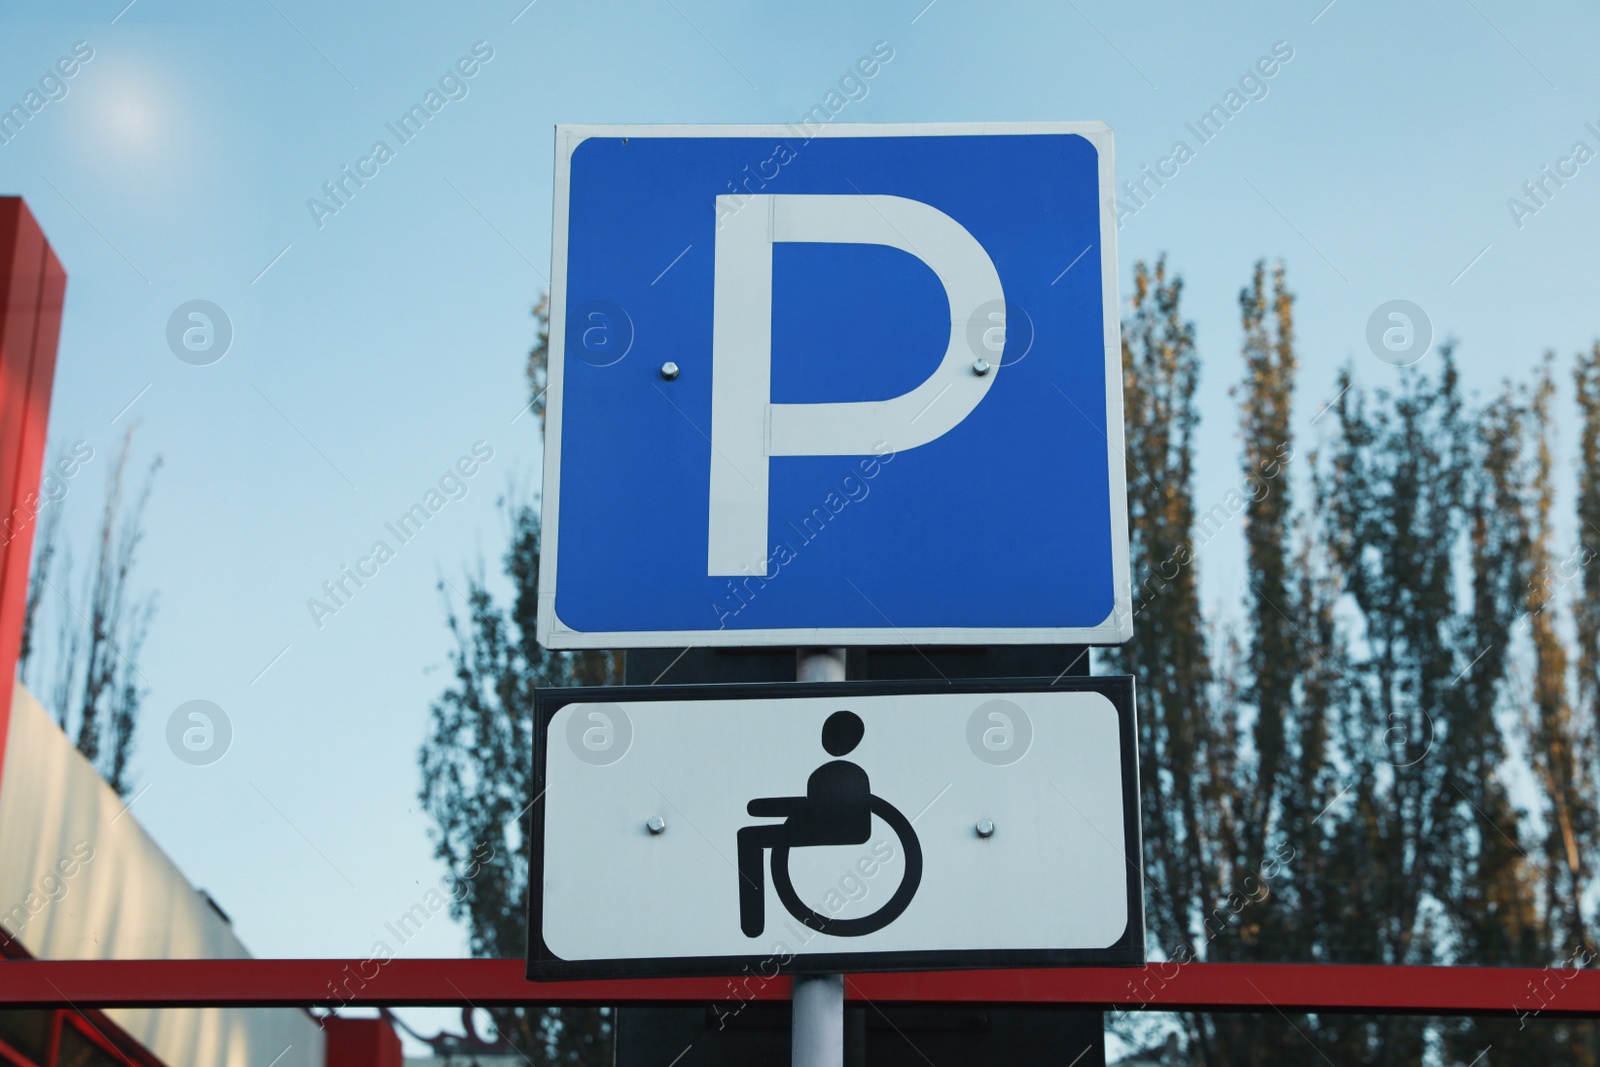 Photo of Handicapped parking sign near building window outdoors